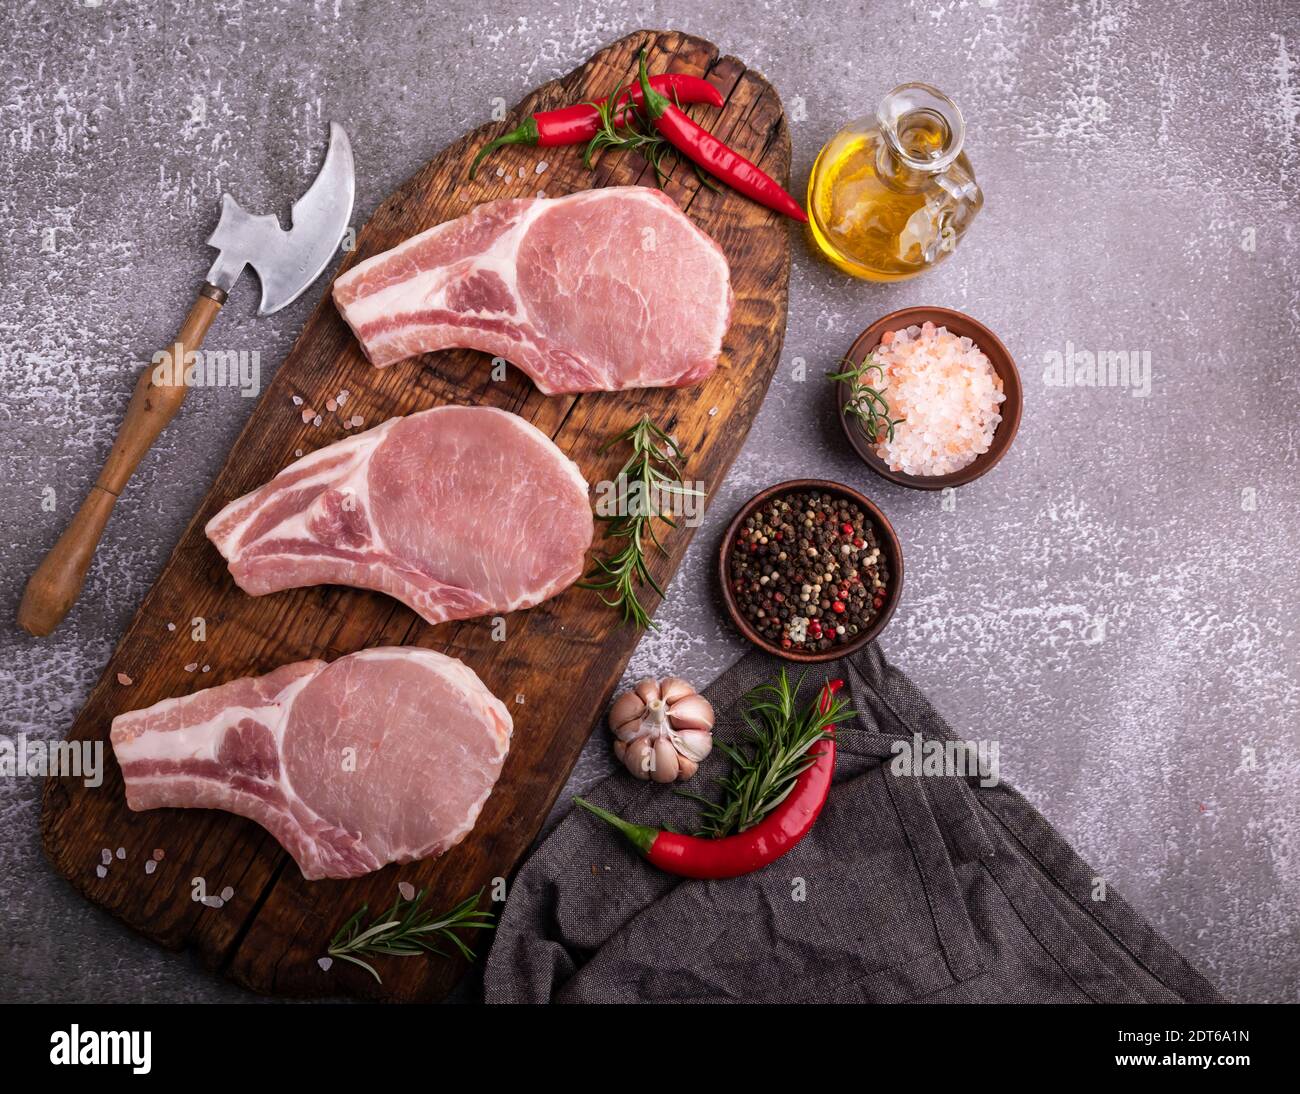 fresh raw meat pork, beef, chop on a bone, on the board, spices Stock Photo